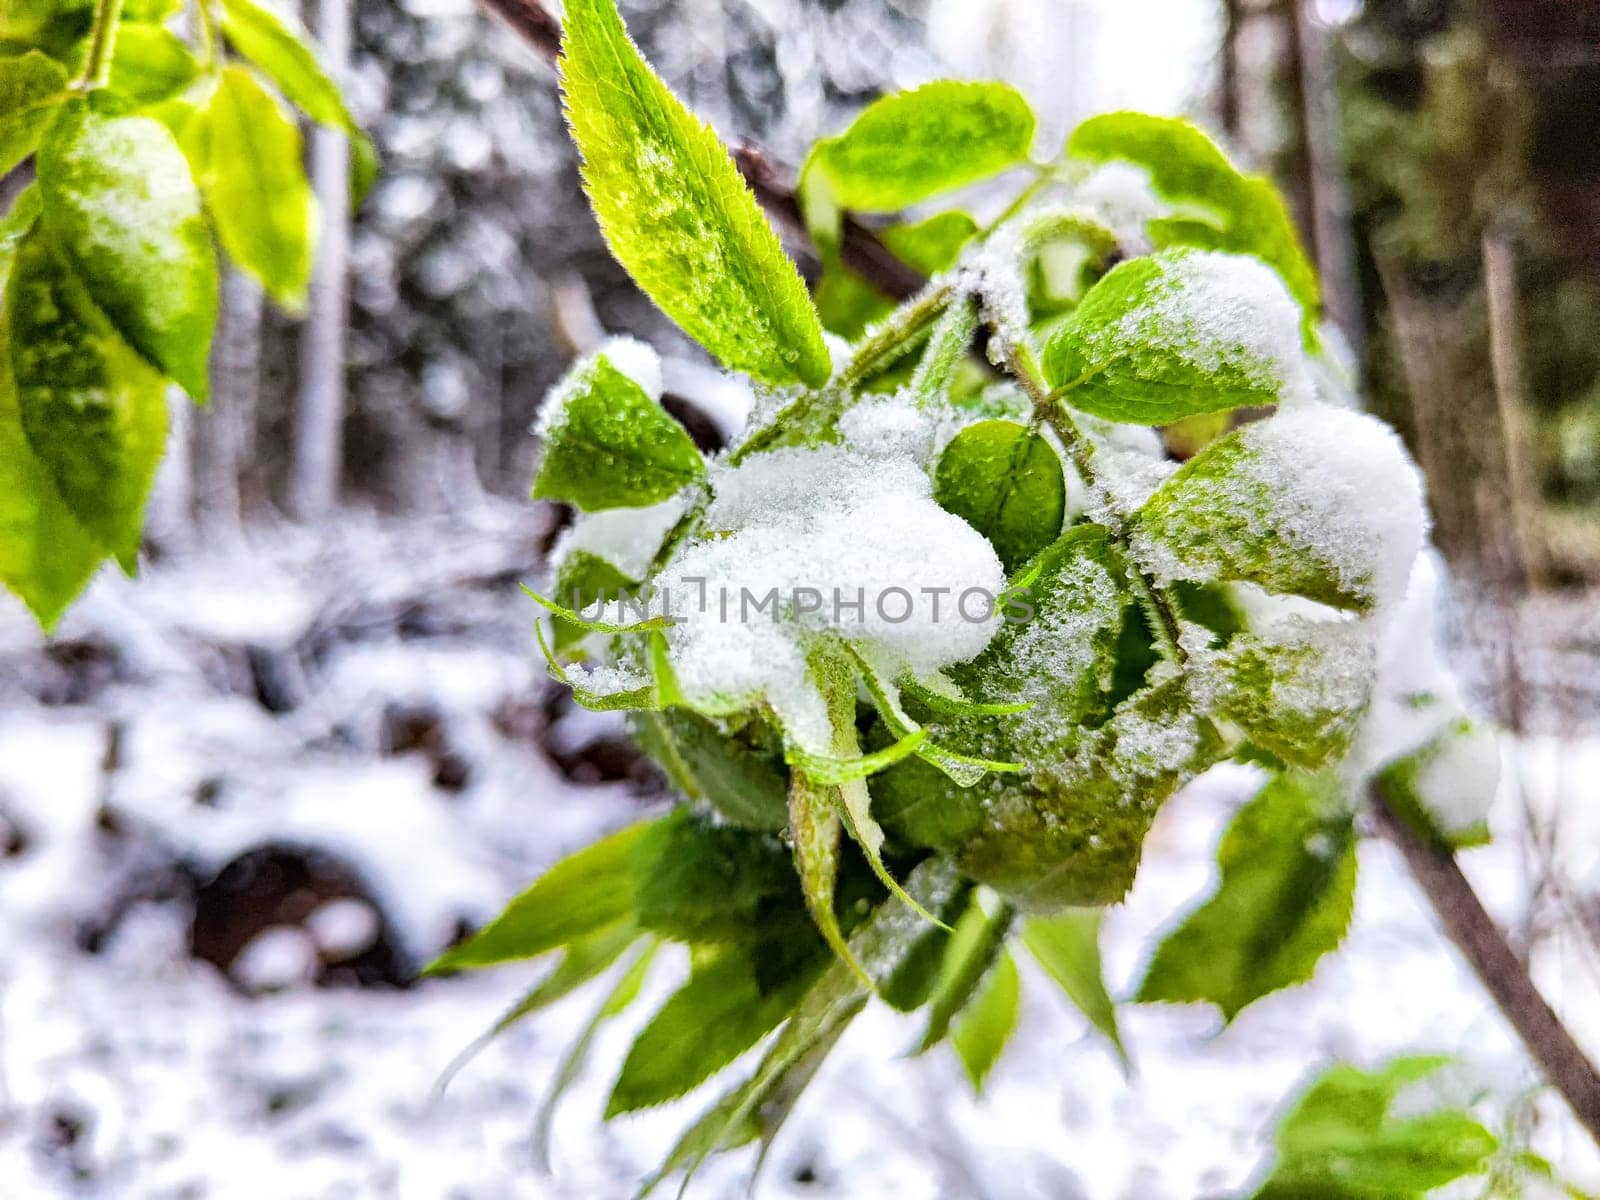 Snow on green leaves. Early spring or autumn. Cold weather, nature. Fresh Snowfall on Green Leaves in a Forest Setting by keleny